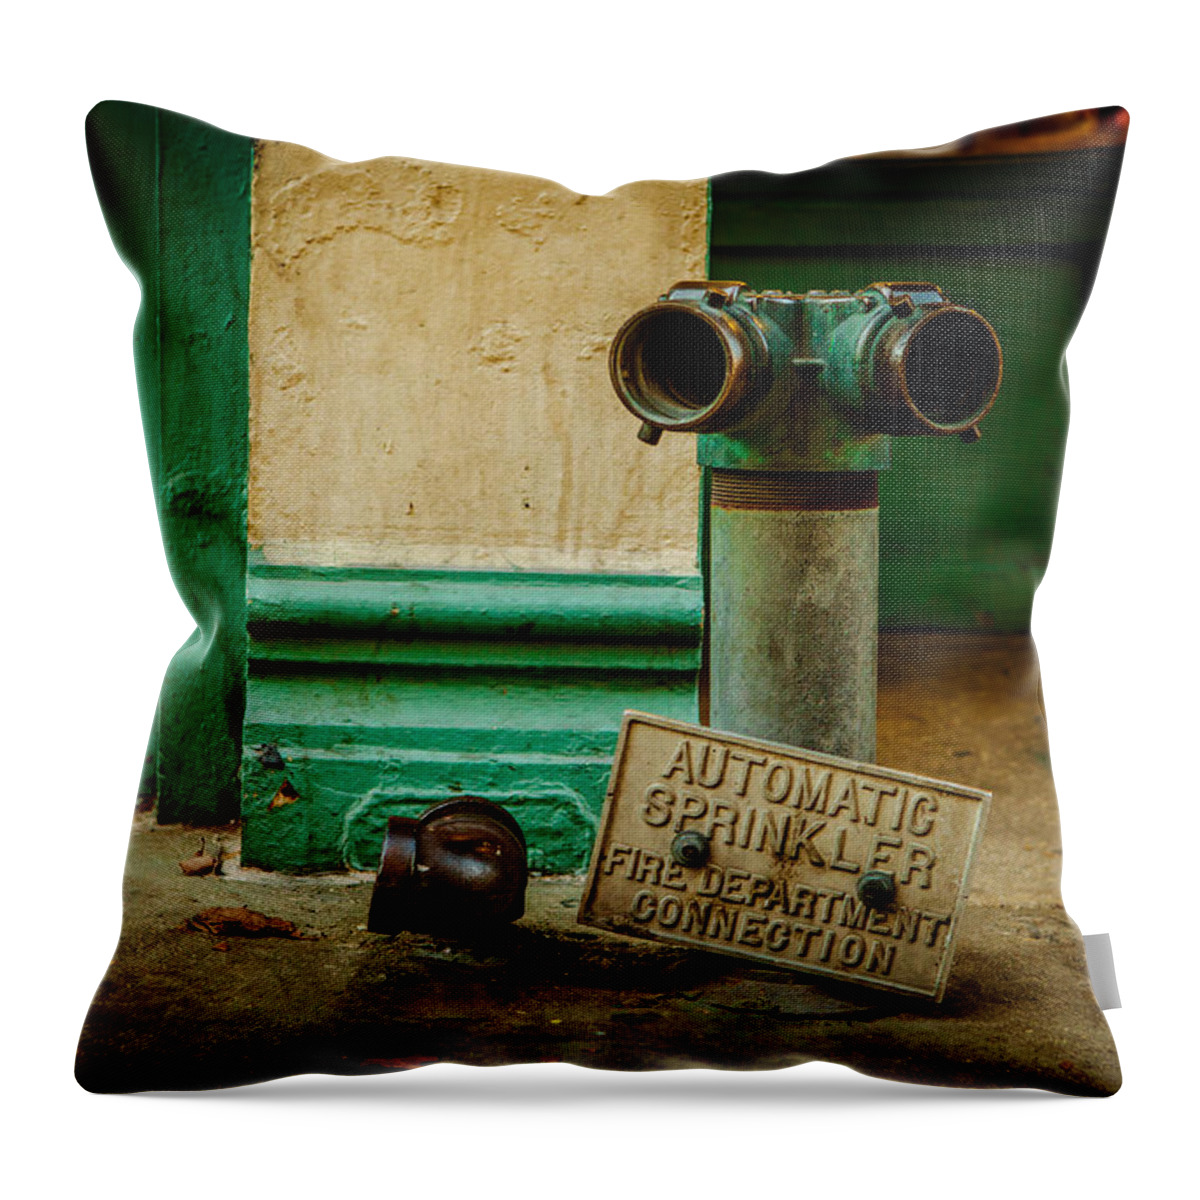 Architecture Throw Pillow featuring the photograph Sprinkler Green by Melinda Ledsome